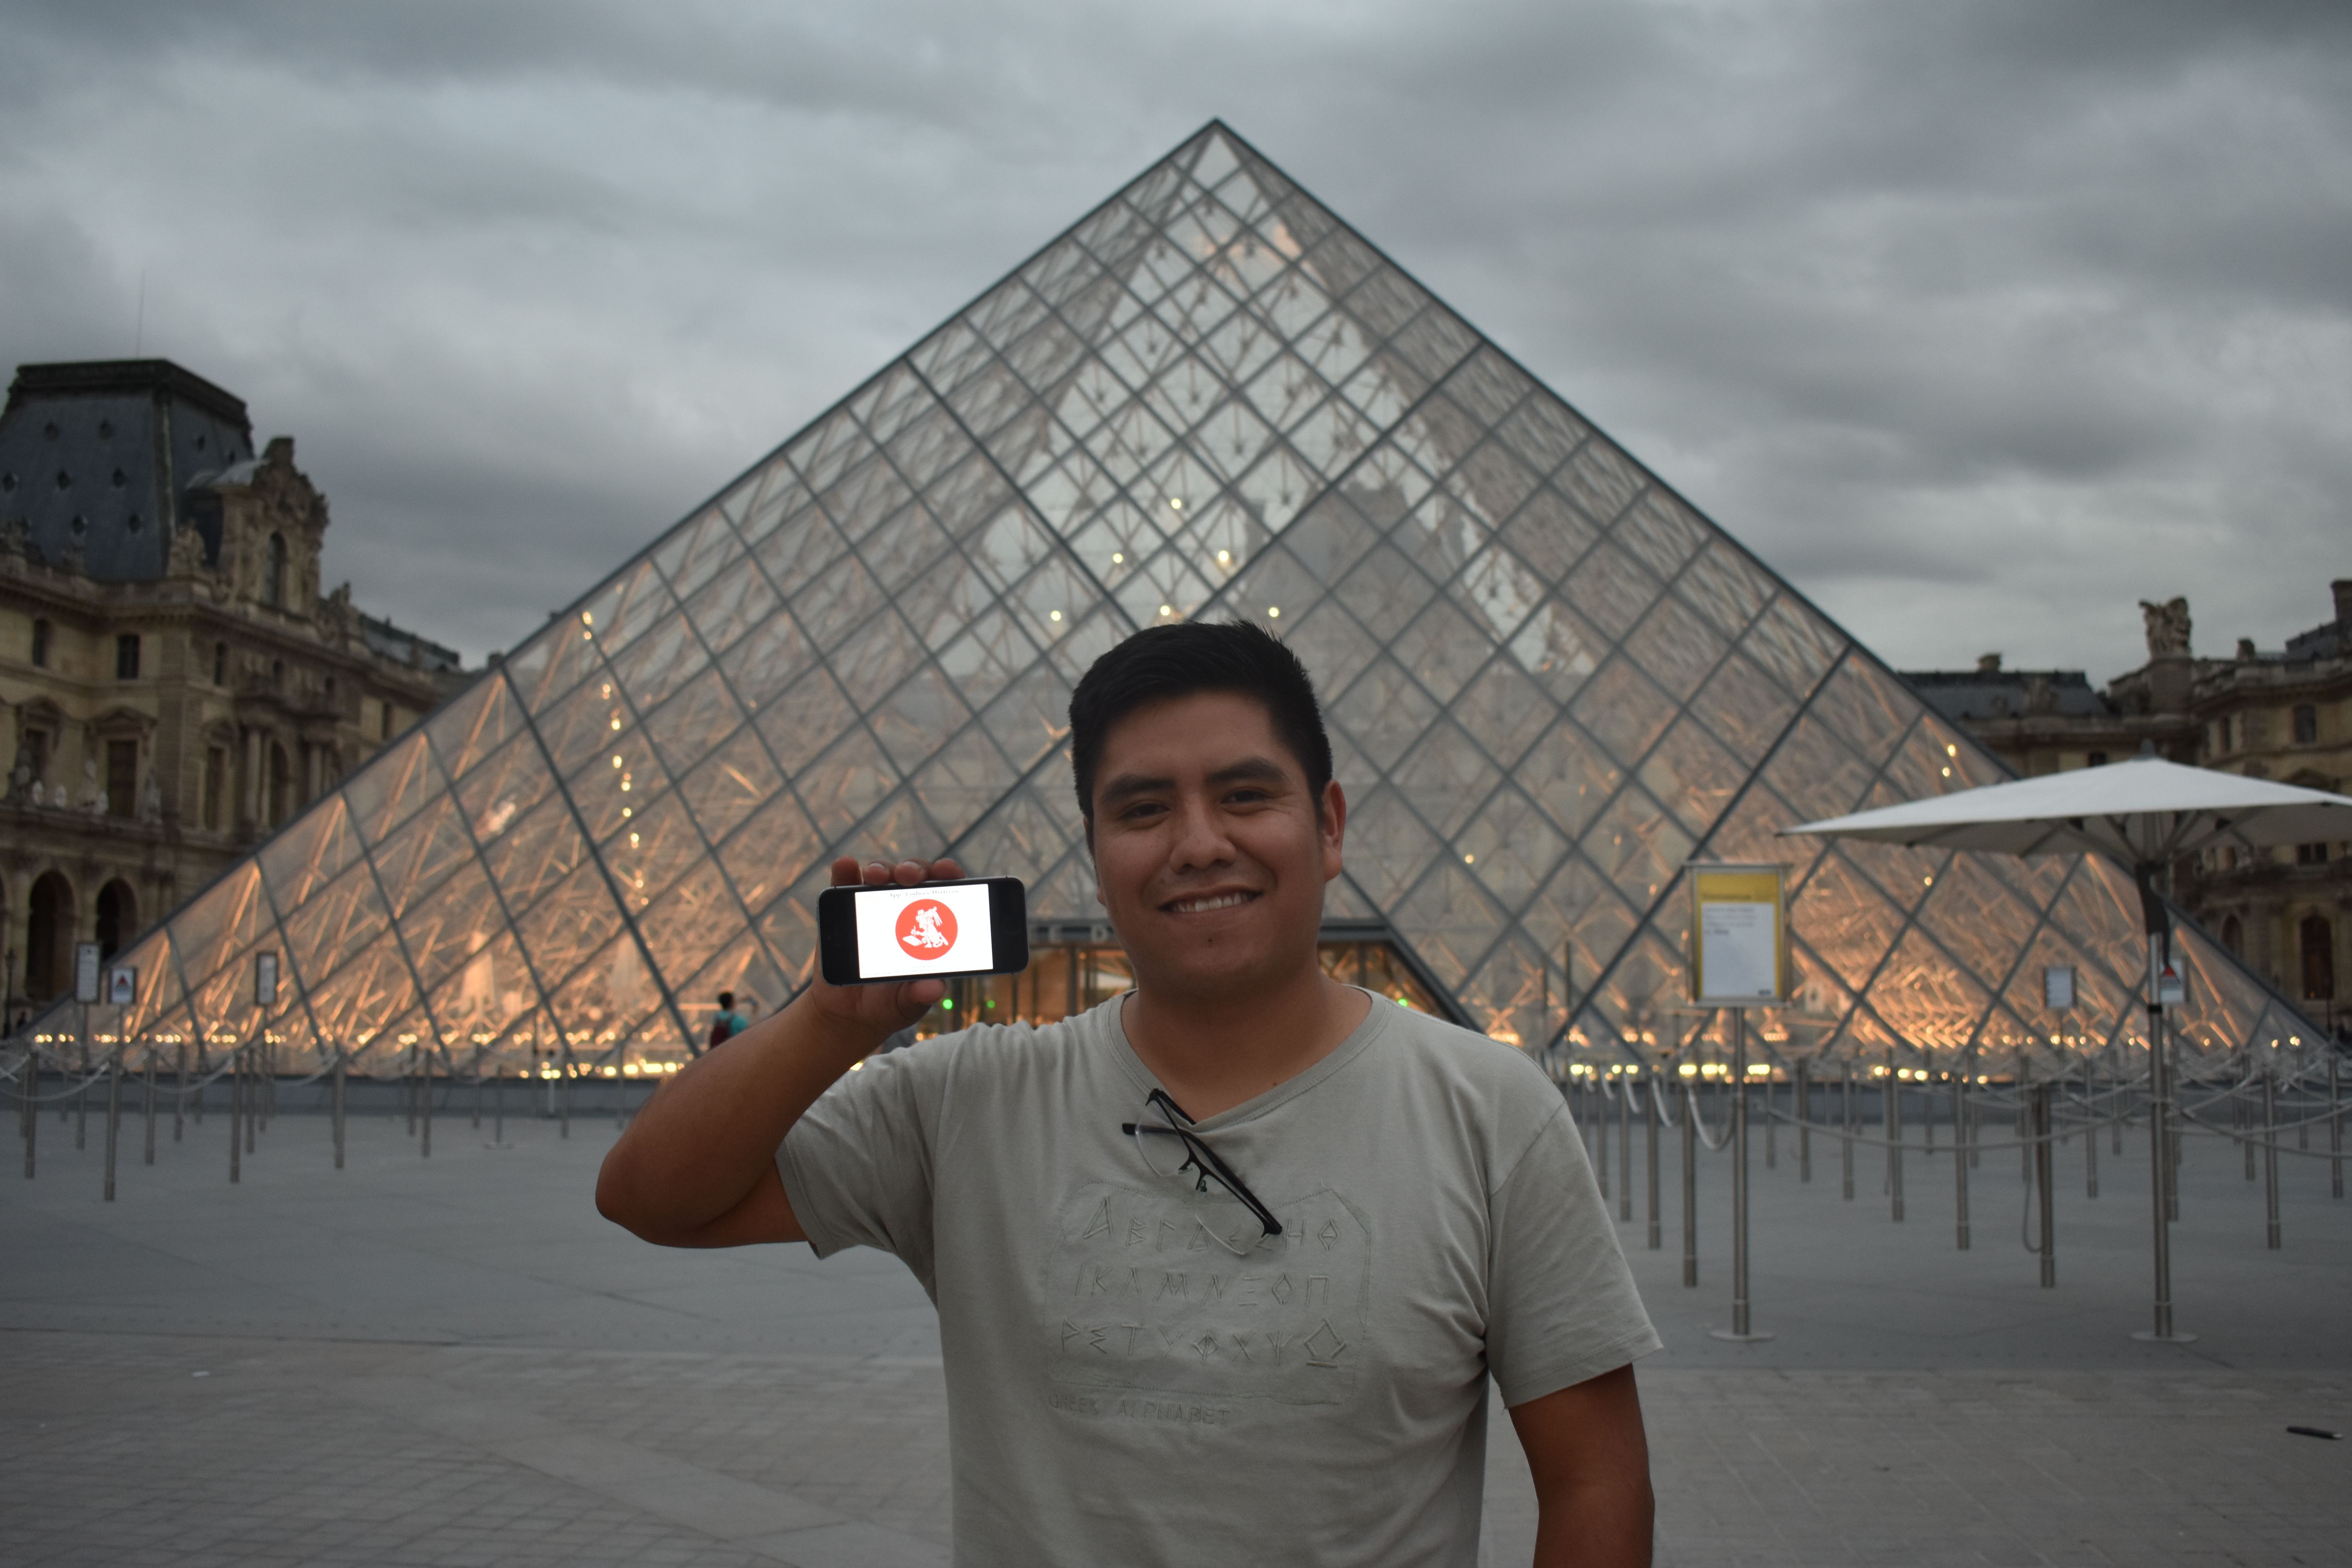 Aguilar poses in front of a glass pyramid building, holding up his phone with a graphic